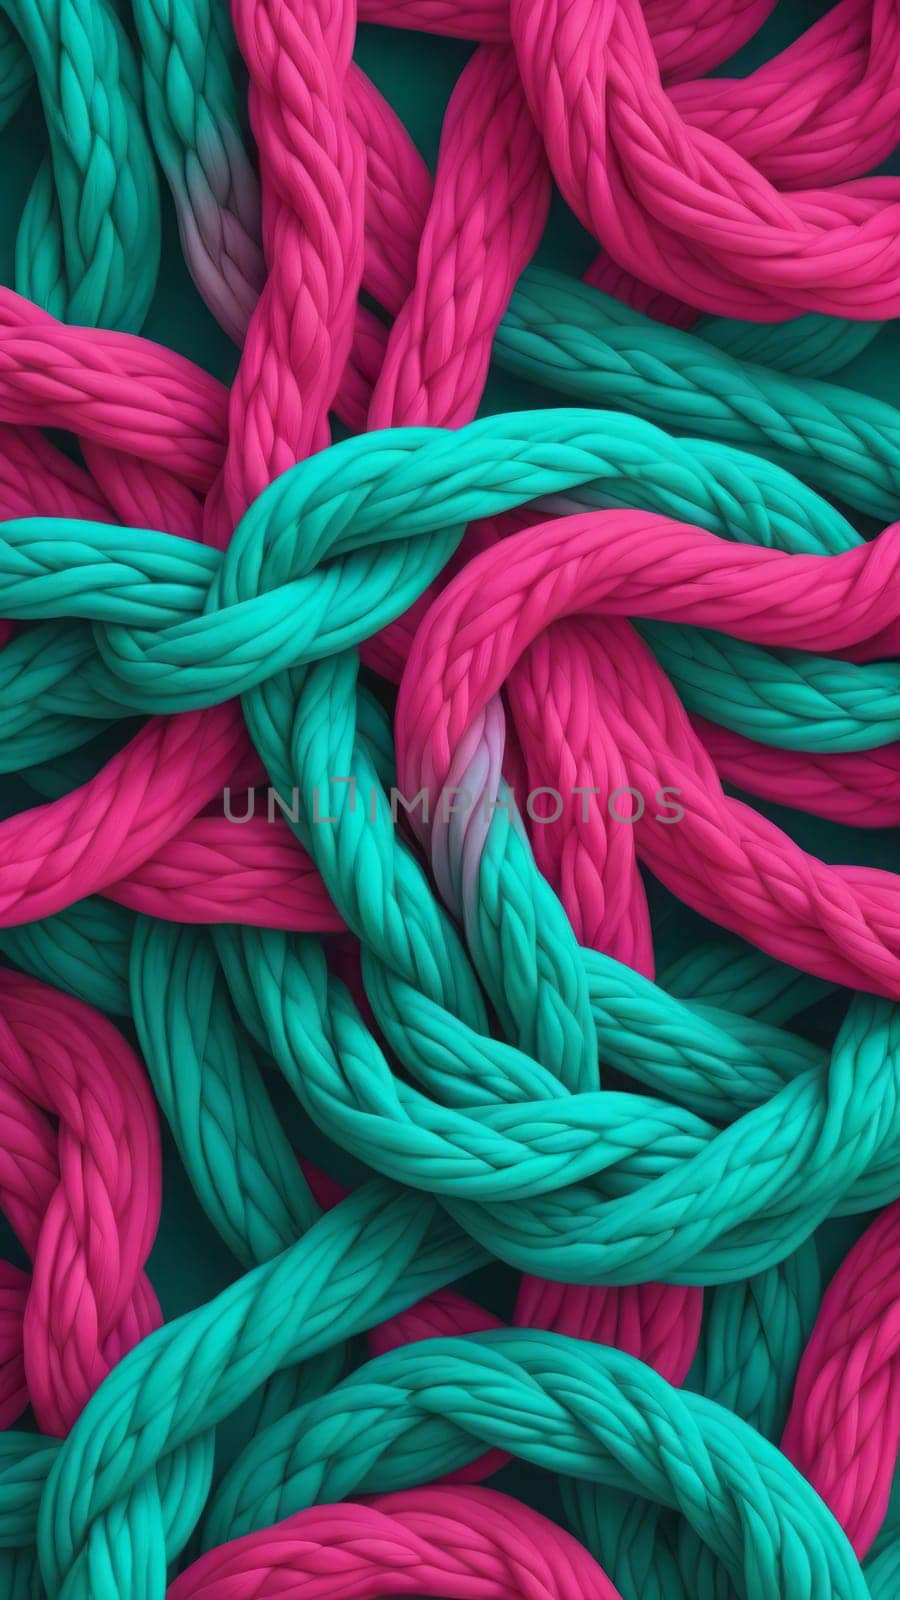 Art for inspiration from Knotted shapes and teal by nkotlyar